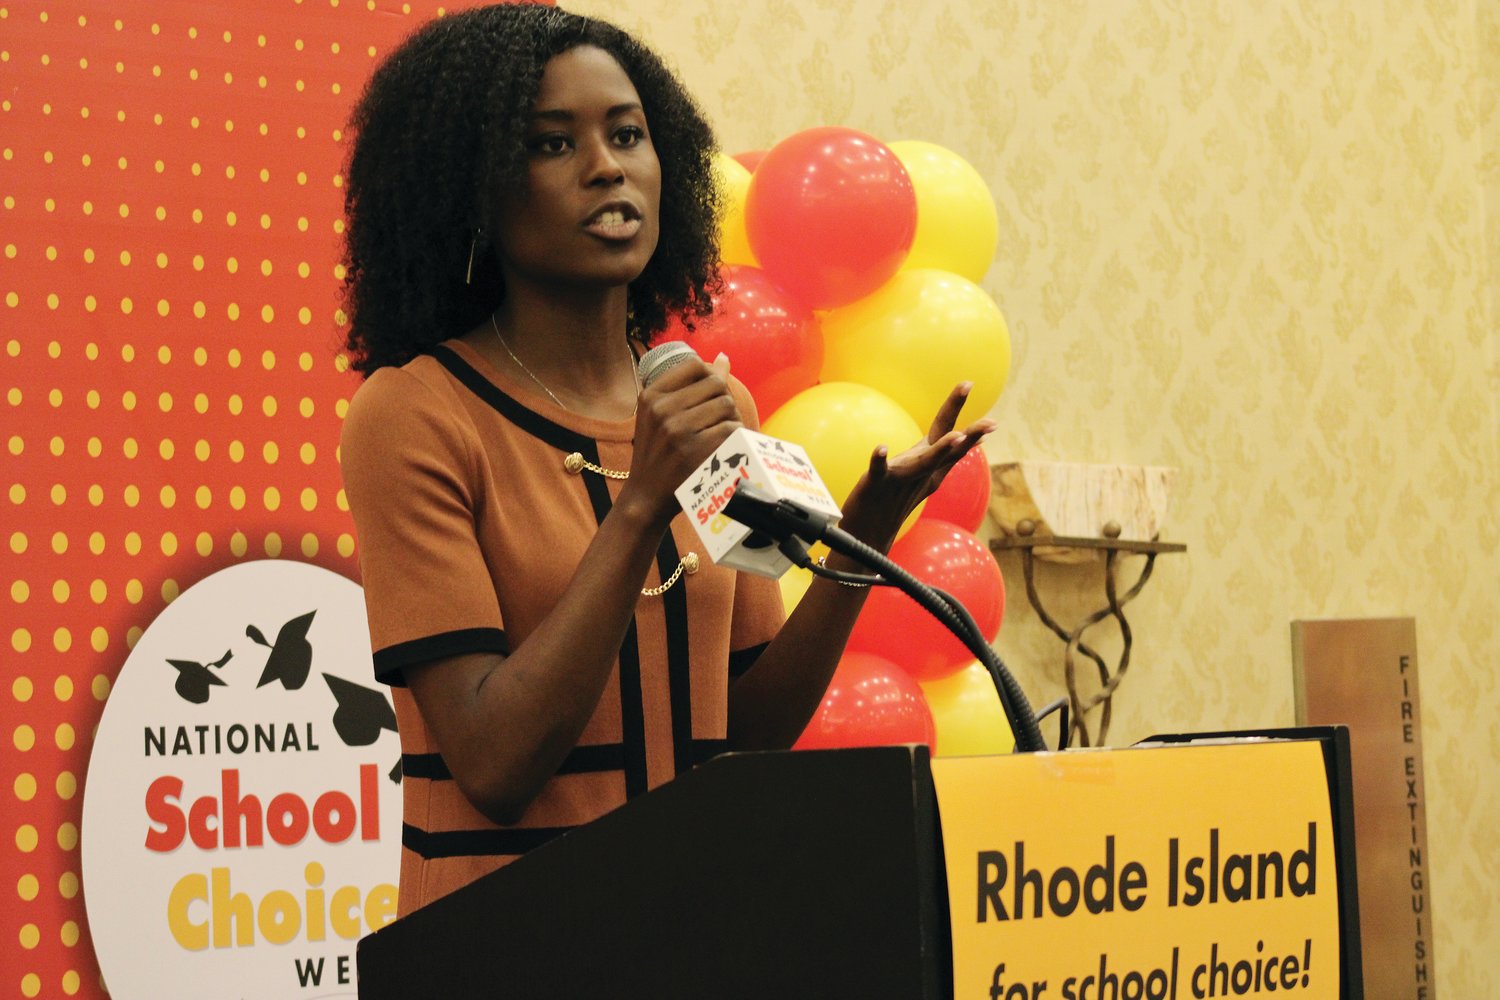 Keynote speaker Hera Varmah, communications director for the National Federation for Children, speaks at the School Choice Fair held at the Crowne Plaza in Warwick on January 22. In her speech, Varmah recalled how school choice played a big role in her and her siblings’ overcoming poverty.